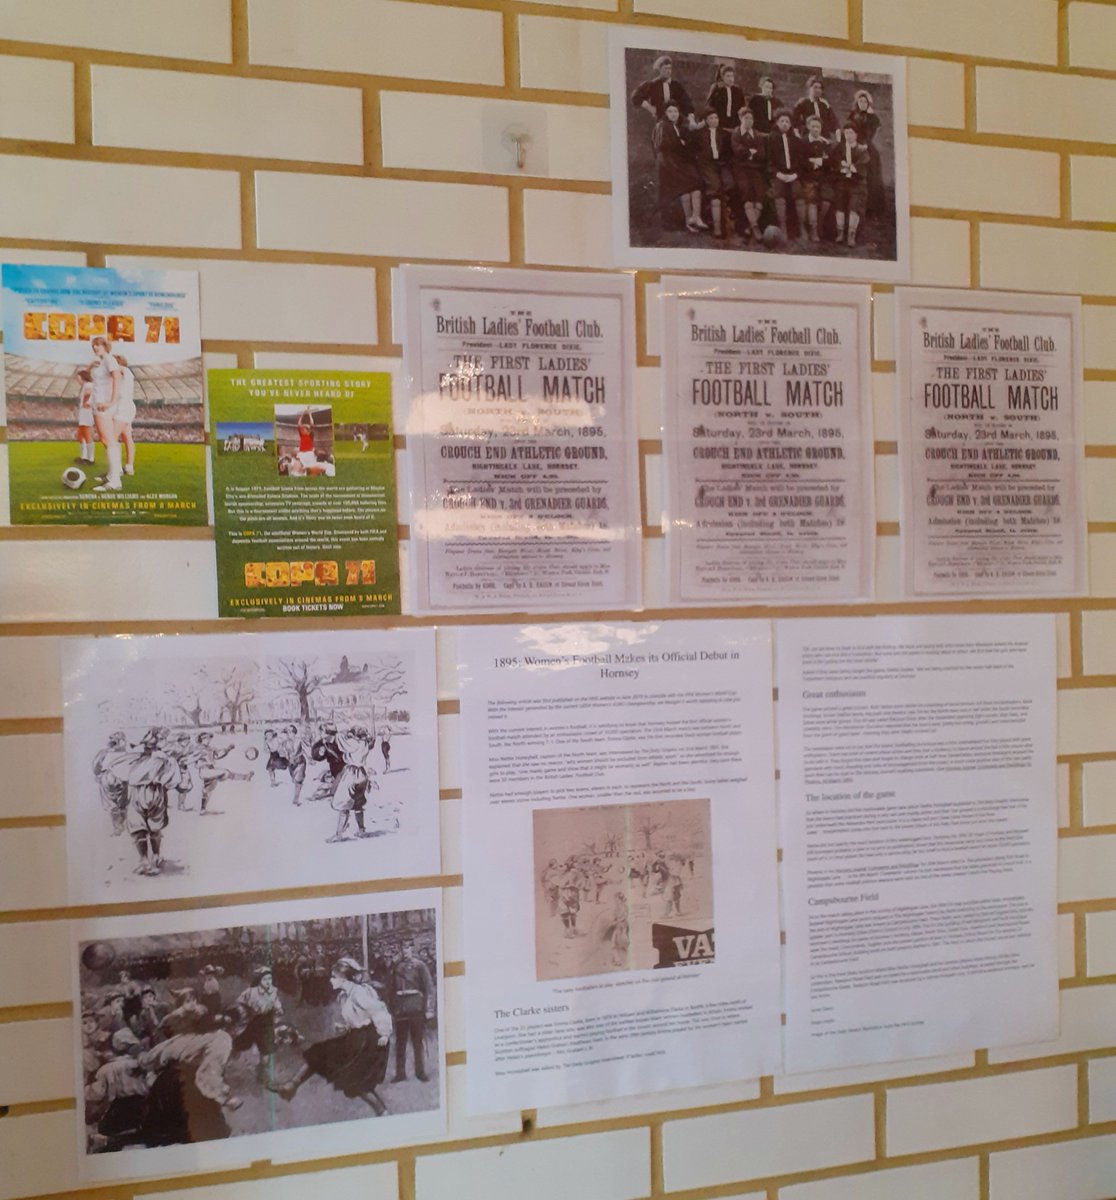 Fun fact - The first official women's football match was played right here in Hornsey in 1895. 
Read about it in our lobby, or on the Hornsey Historical Society.
ow.ly/XjjK50QLLEv
Join us for #COPA71 ⚽️ and discover the story of #TheLostLionesses. 
In cinemas from 8 March.